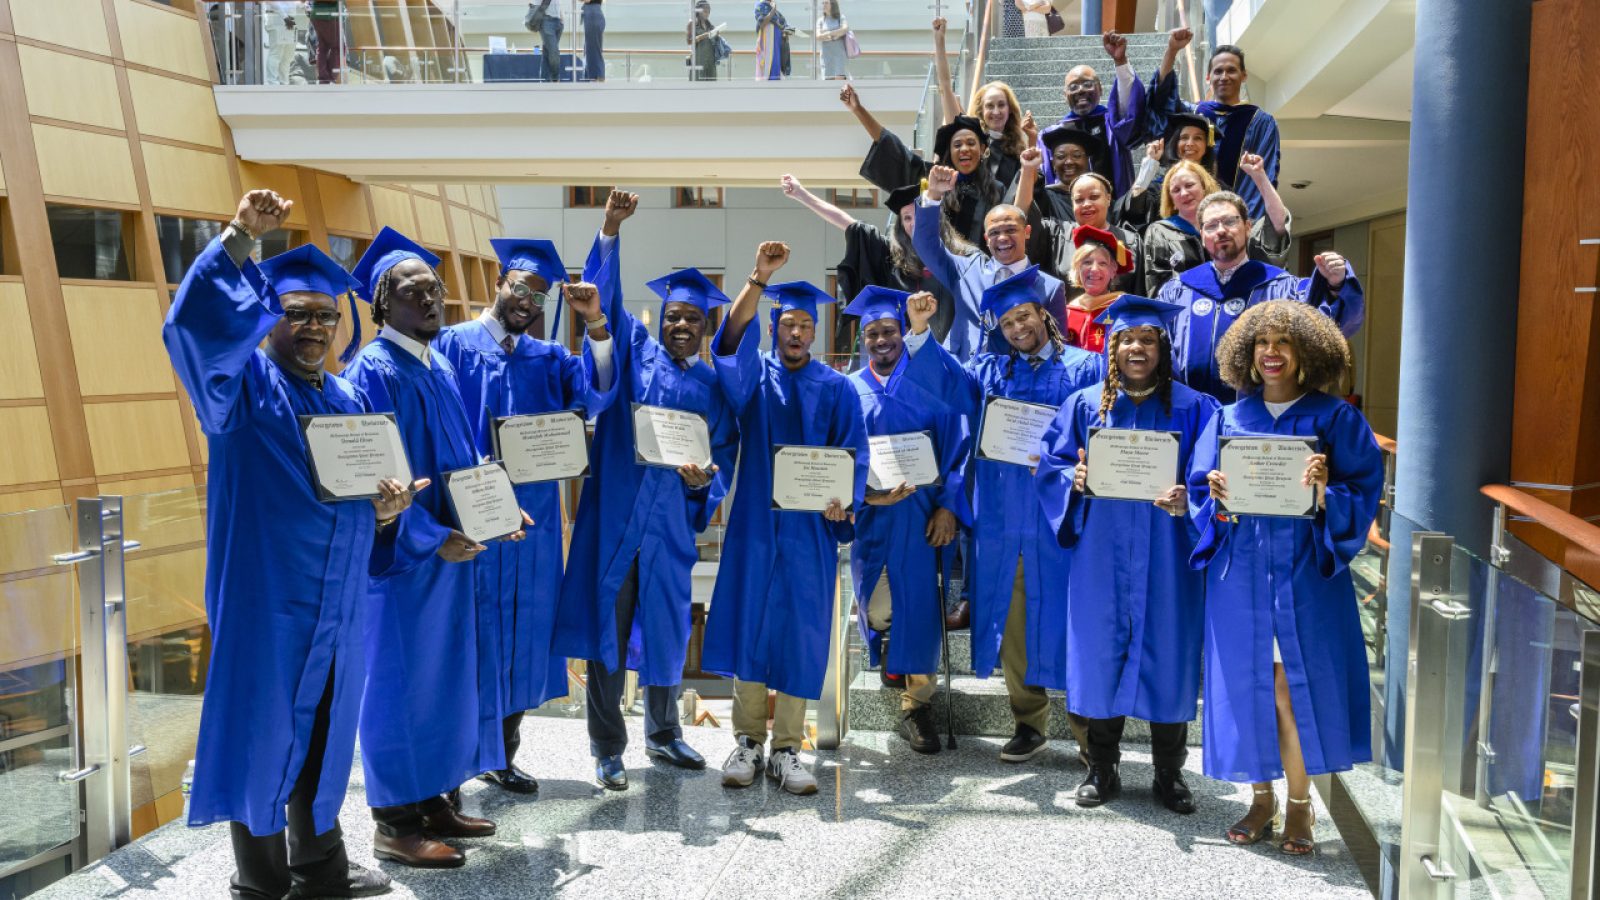 An image of graduates from the Pivot Program wearing blue cap and gowns.